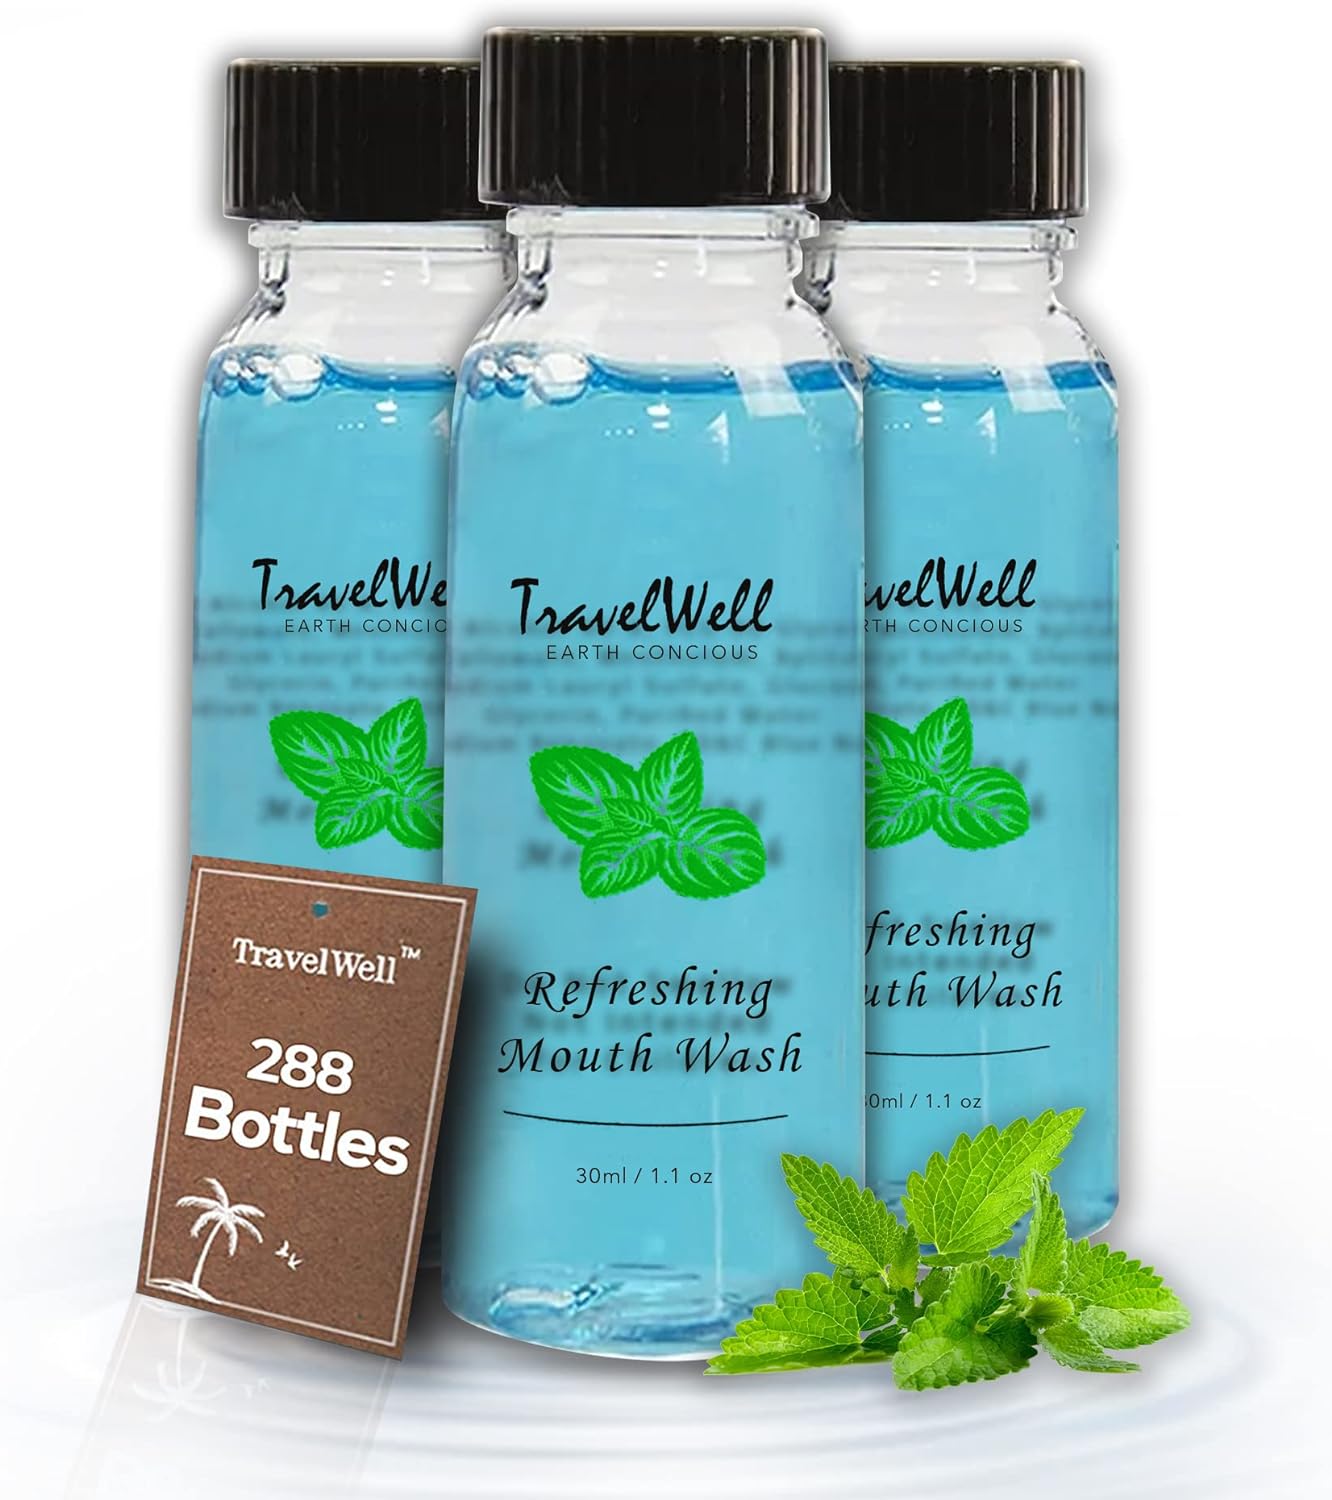 TRAVELWELL Individually Wrapped Hotel Toiletries Amenities Disposable Outlast Mouthwash Bulk Travel Size,Long Lasting Mint,1  ,288 Bottles per Case